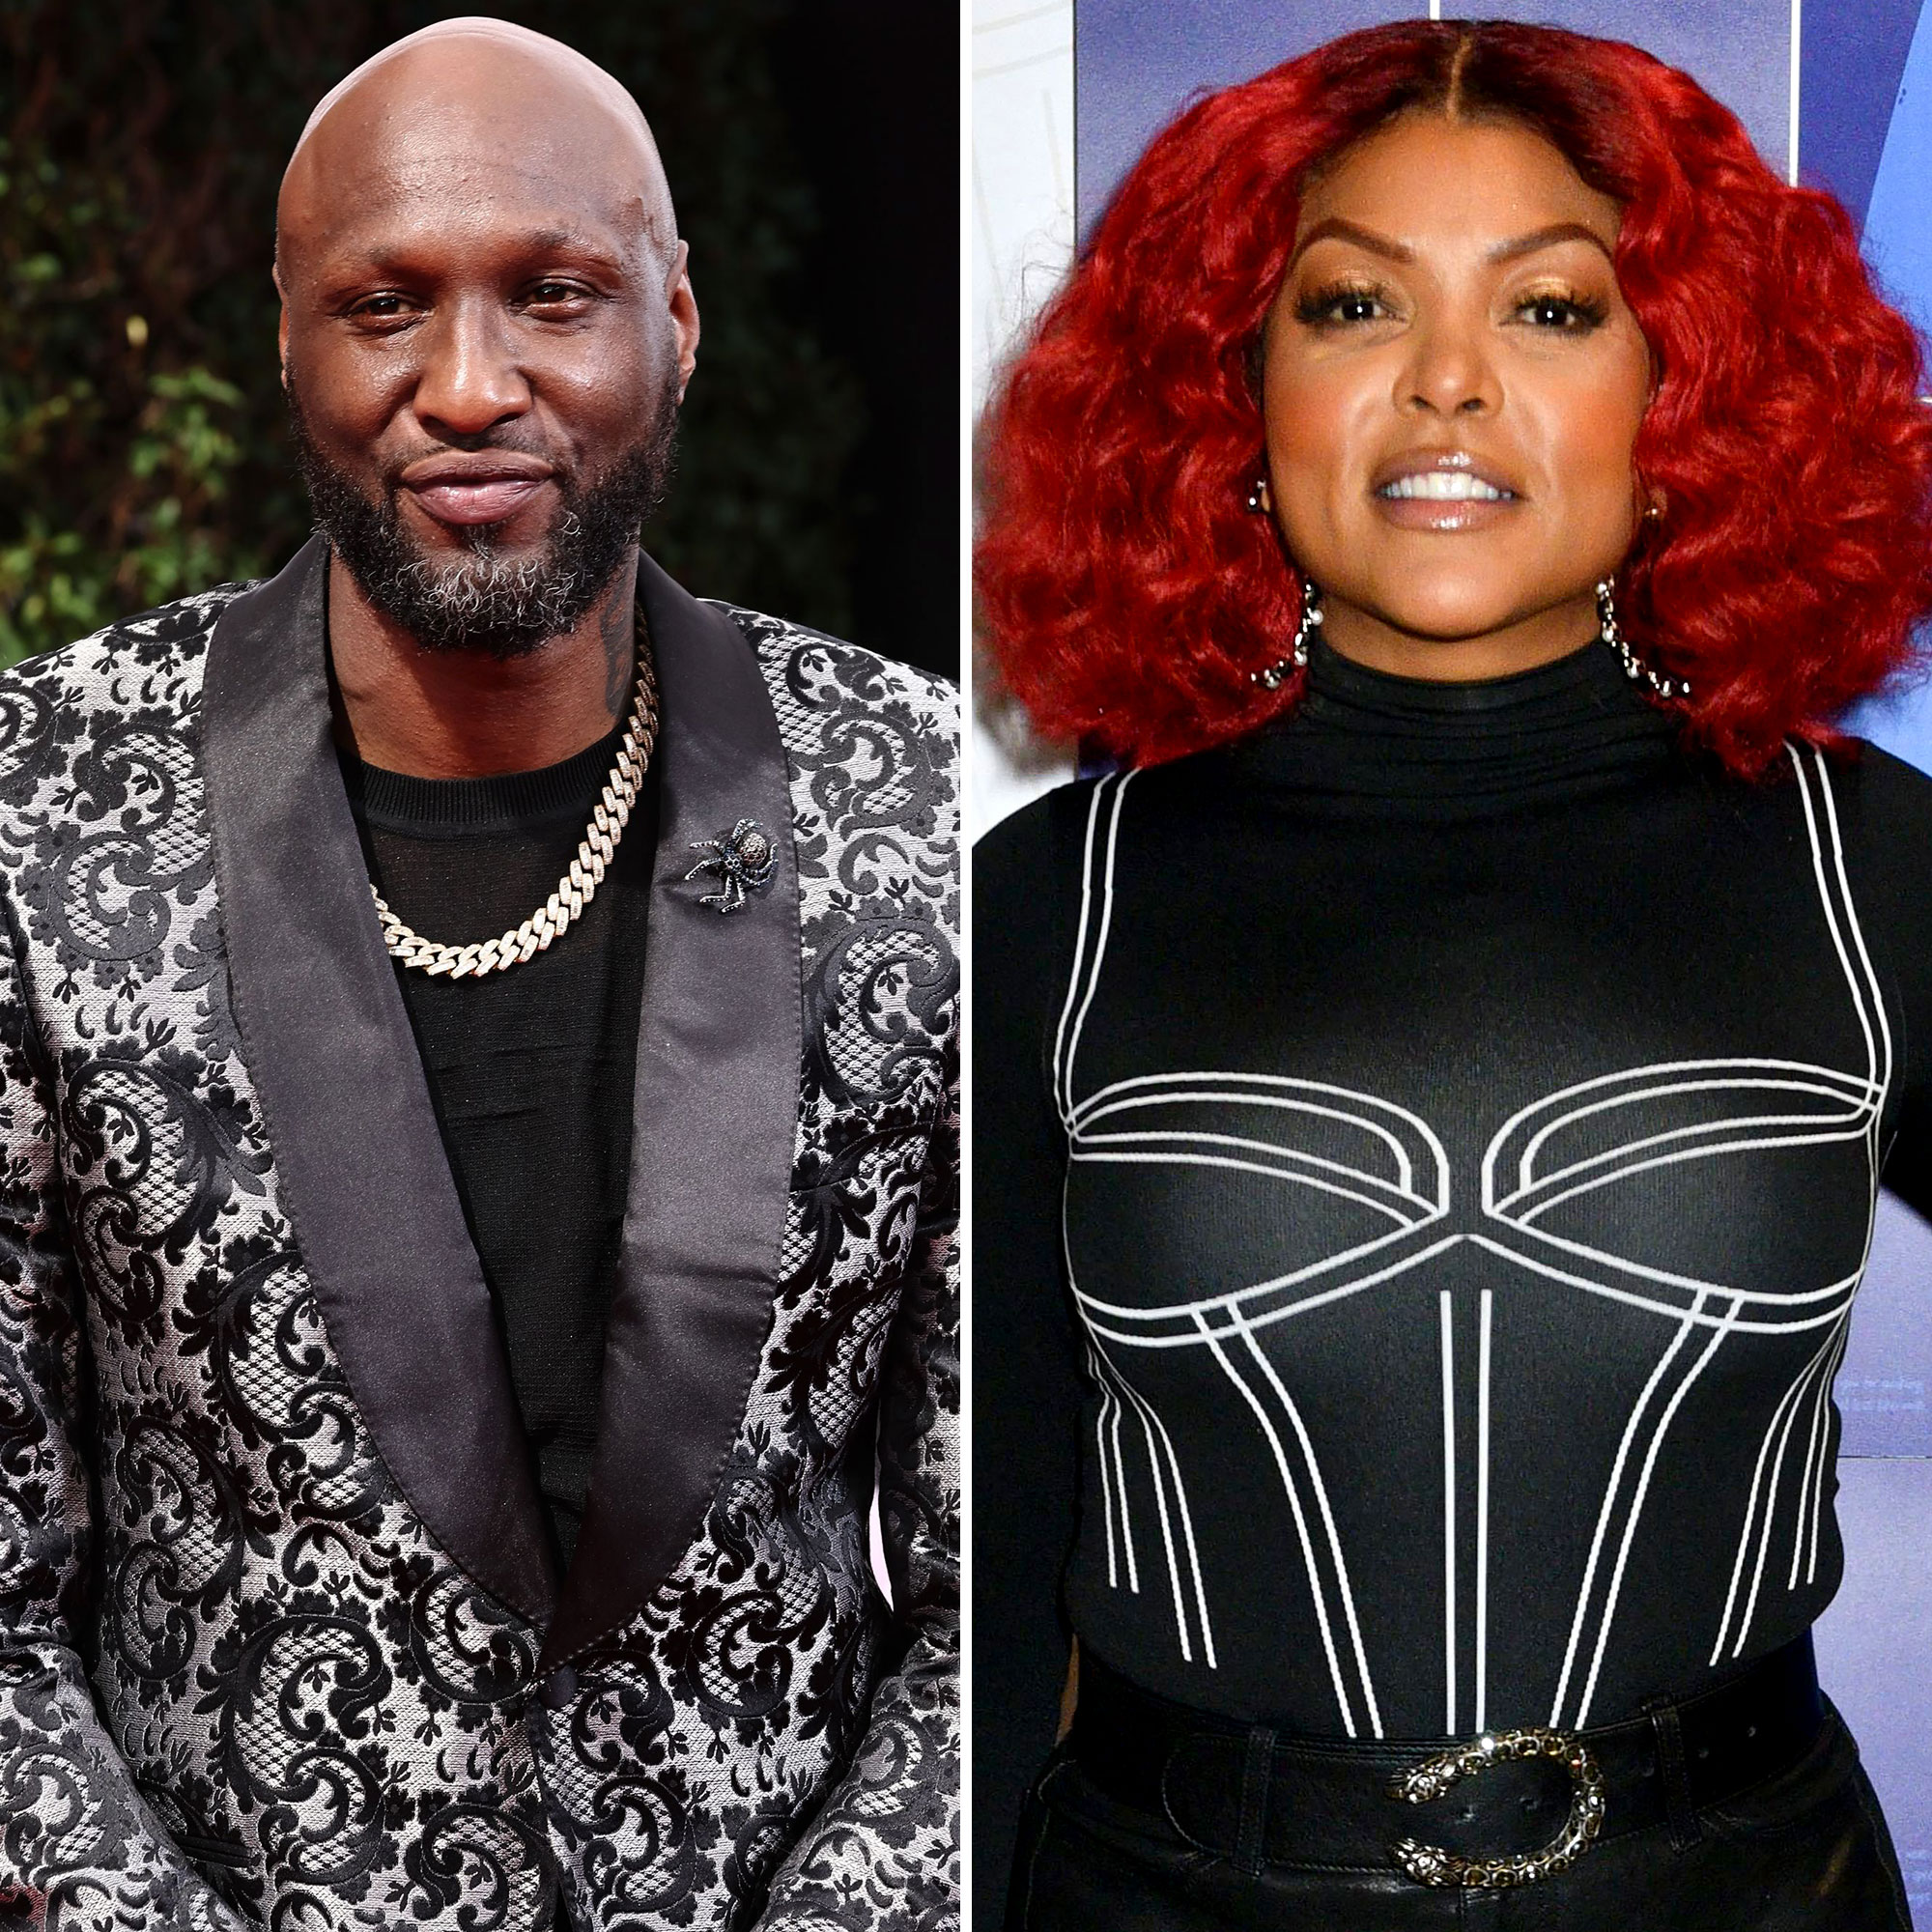 Lamar Odom dating history: From Khloé to Liza